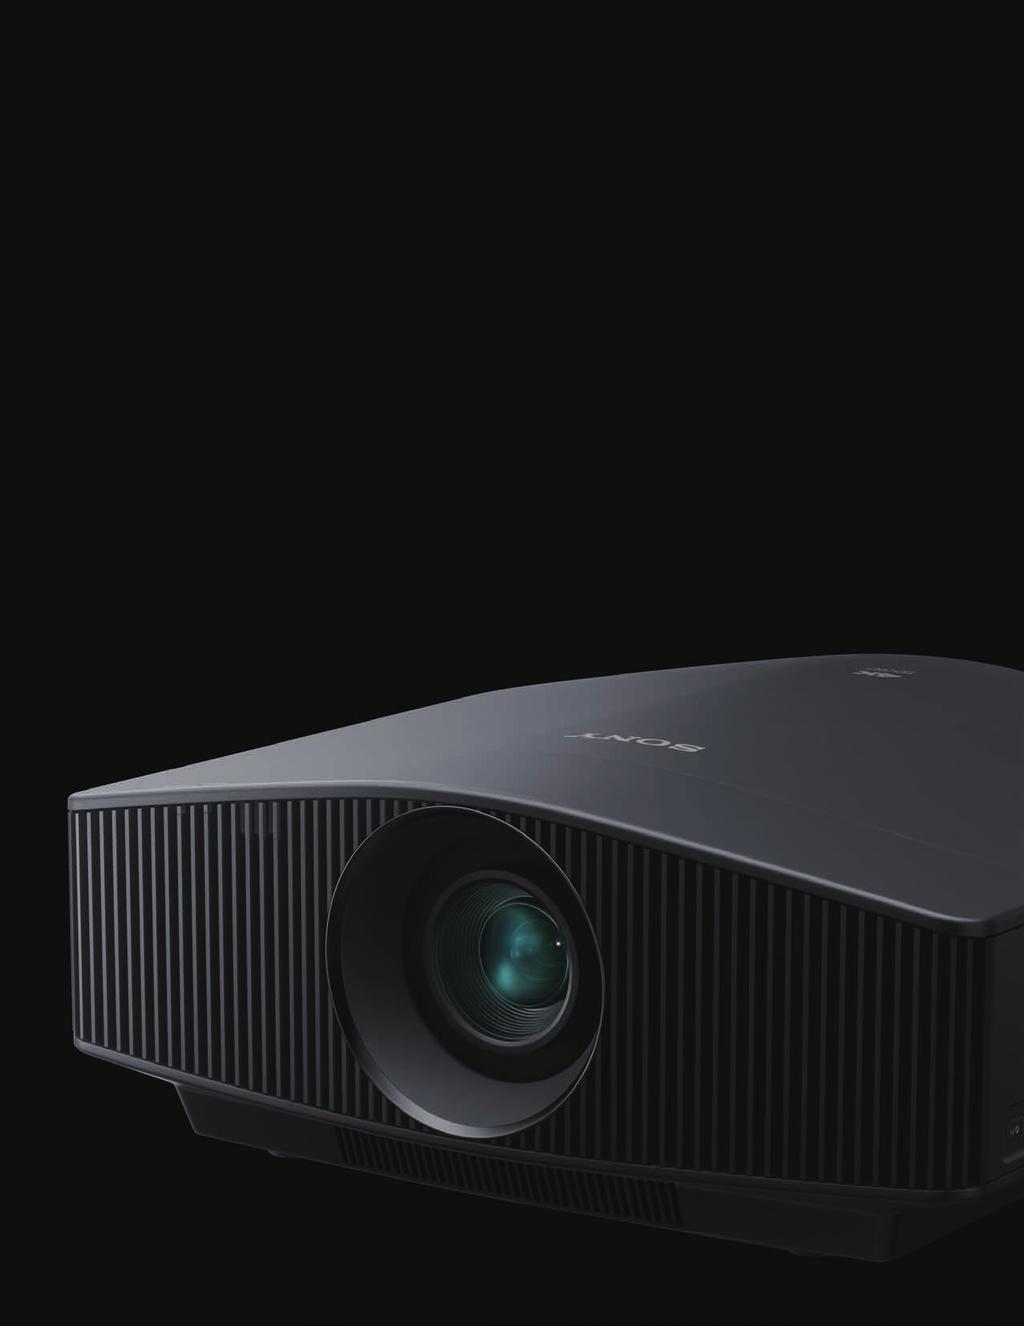 The native 4K resolution home projector with laser light source in such a compact size: It s an unforgettable experience, whatever you re watching.